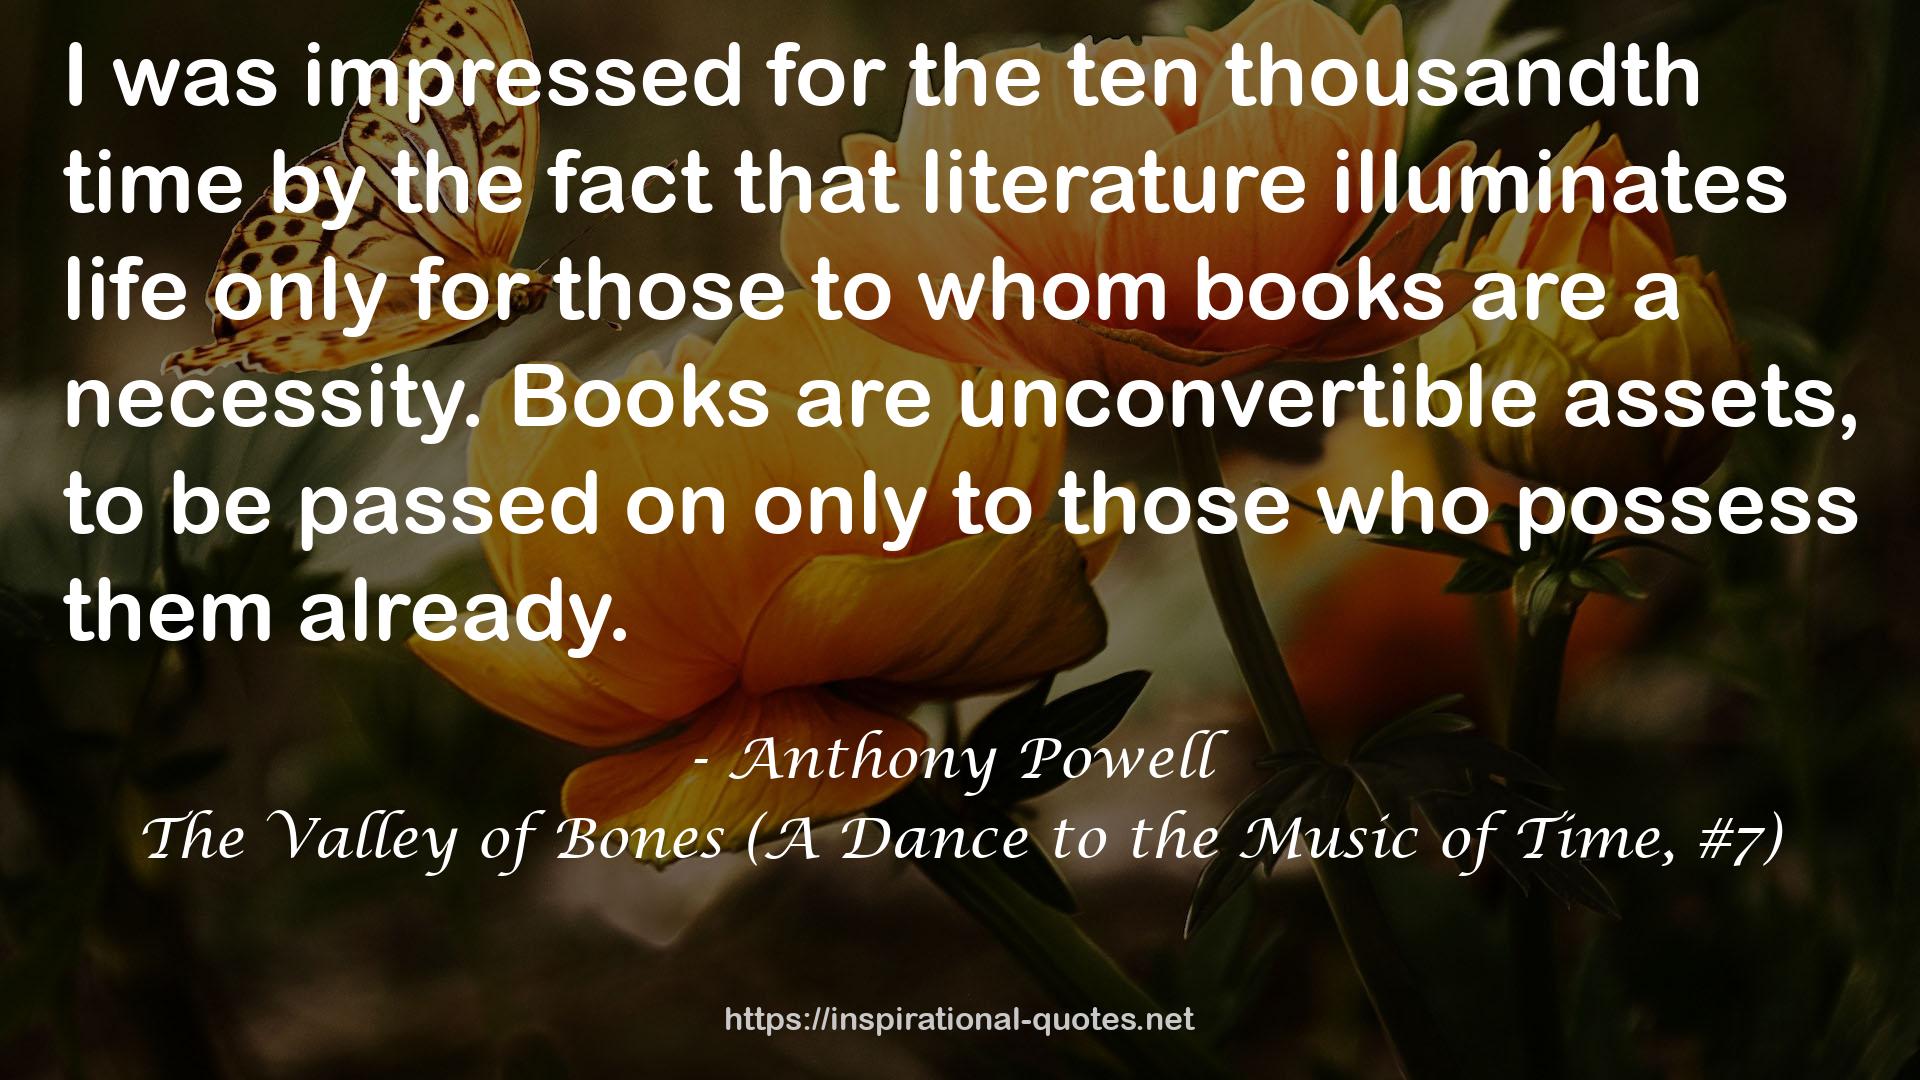 The Valley of Bones (A Dance to the Music of Time, #7) QUOTES